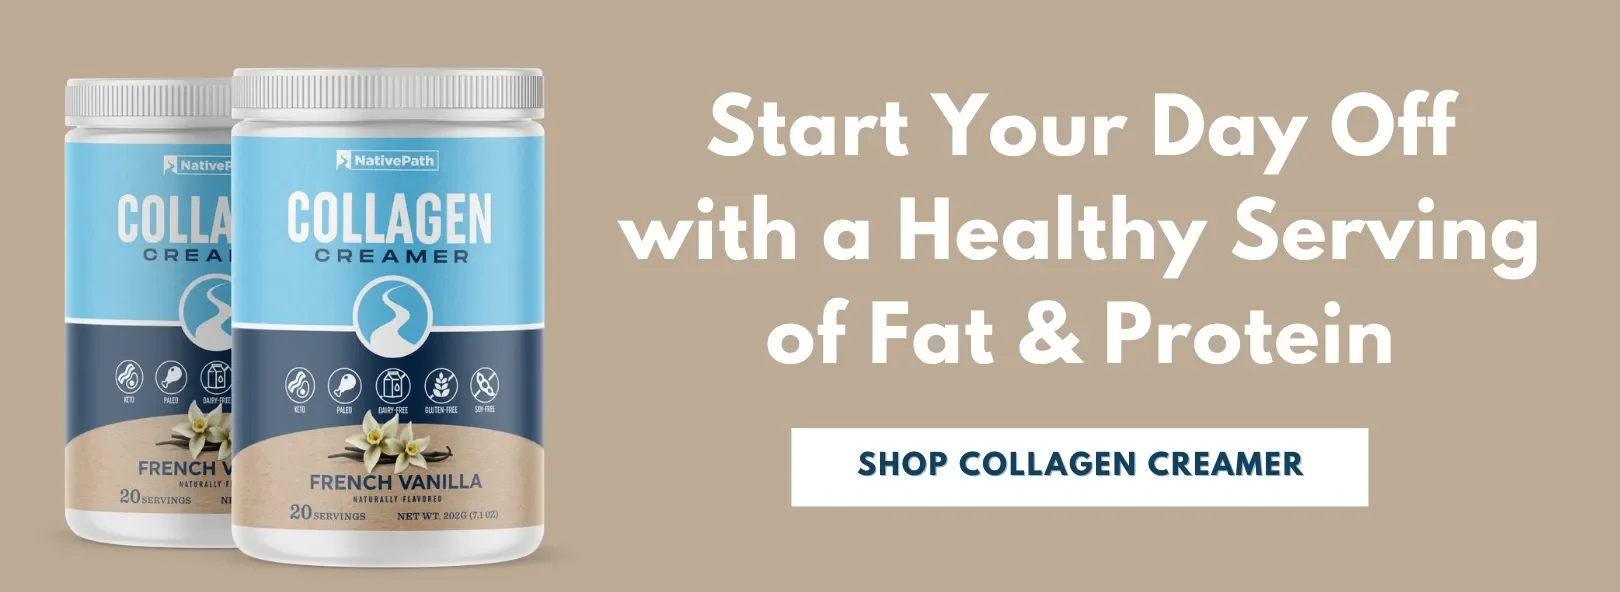 Start Your Day Off with a Healthy Serving of Fat & Protein with NativePath Collagen & MCT Creamer